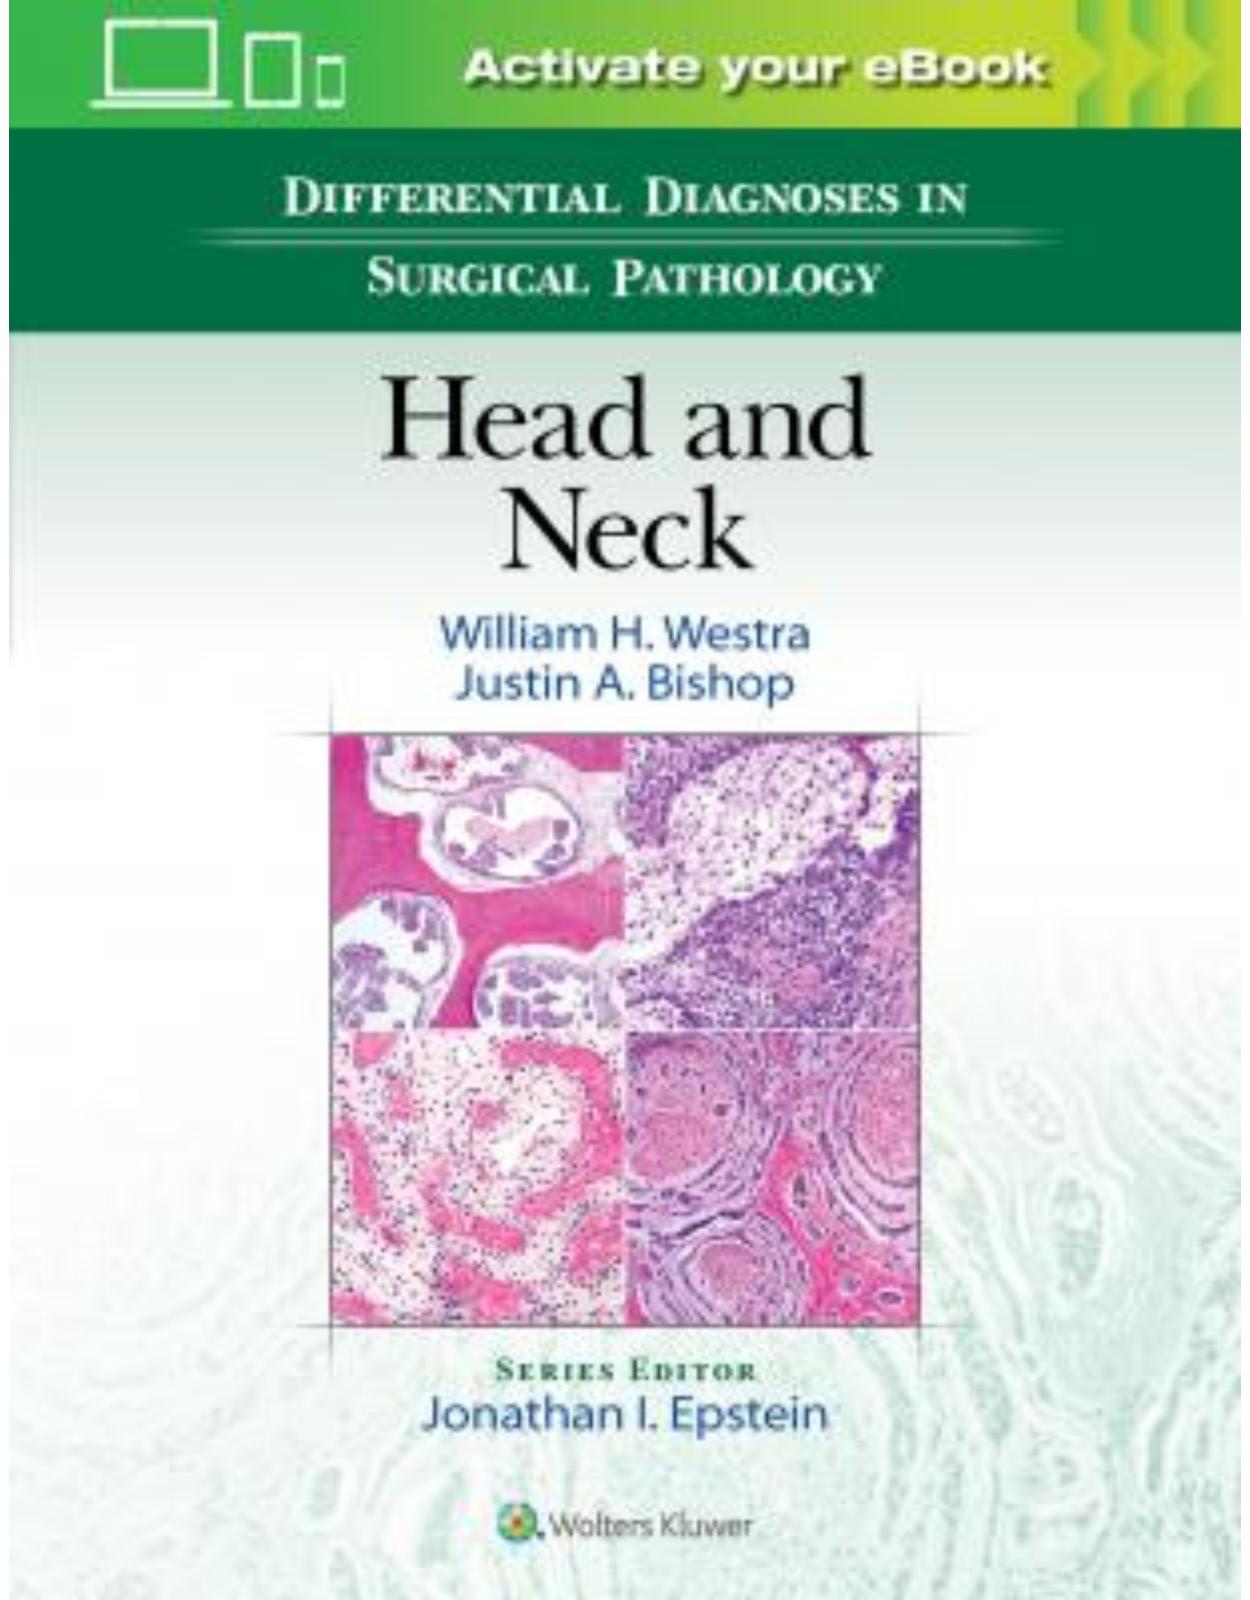 Differential Diagnoses in Surgical Pathology: Head and Neck 